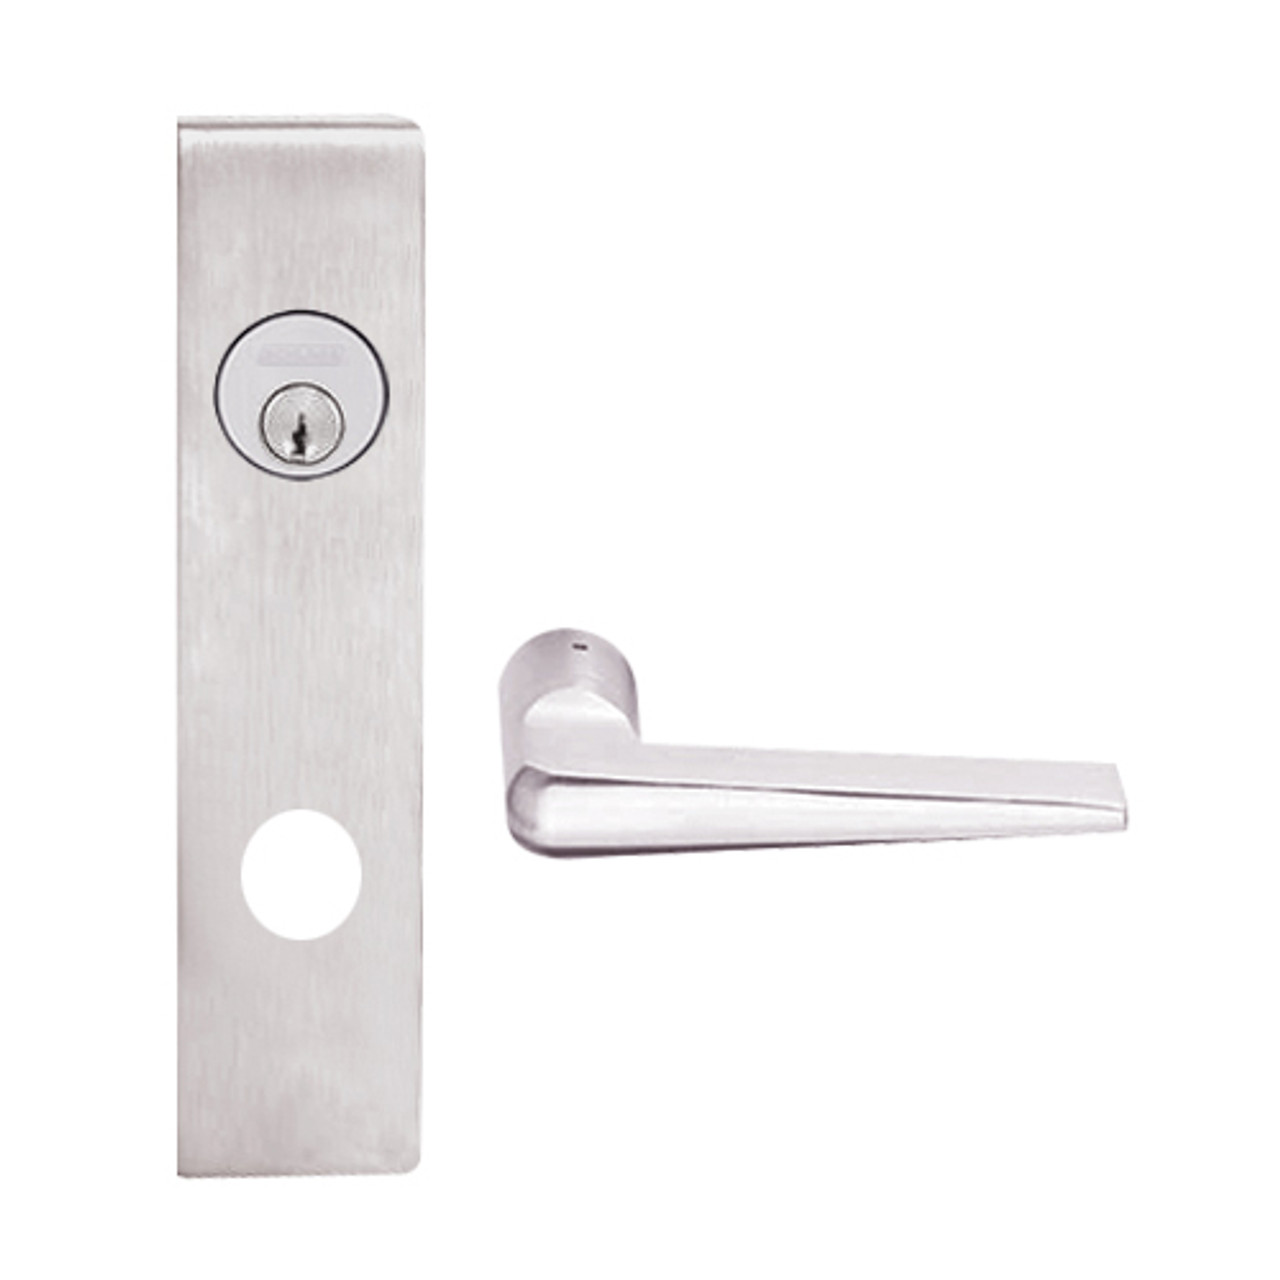 L9453L-05L-629 Schlage L Series Less Cylinder Entrance with Deadbolt Commercial Mortise Lock with 05 Cast Lever Design in Bright Stainless Steel